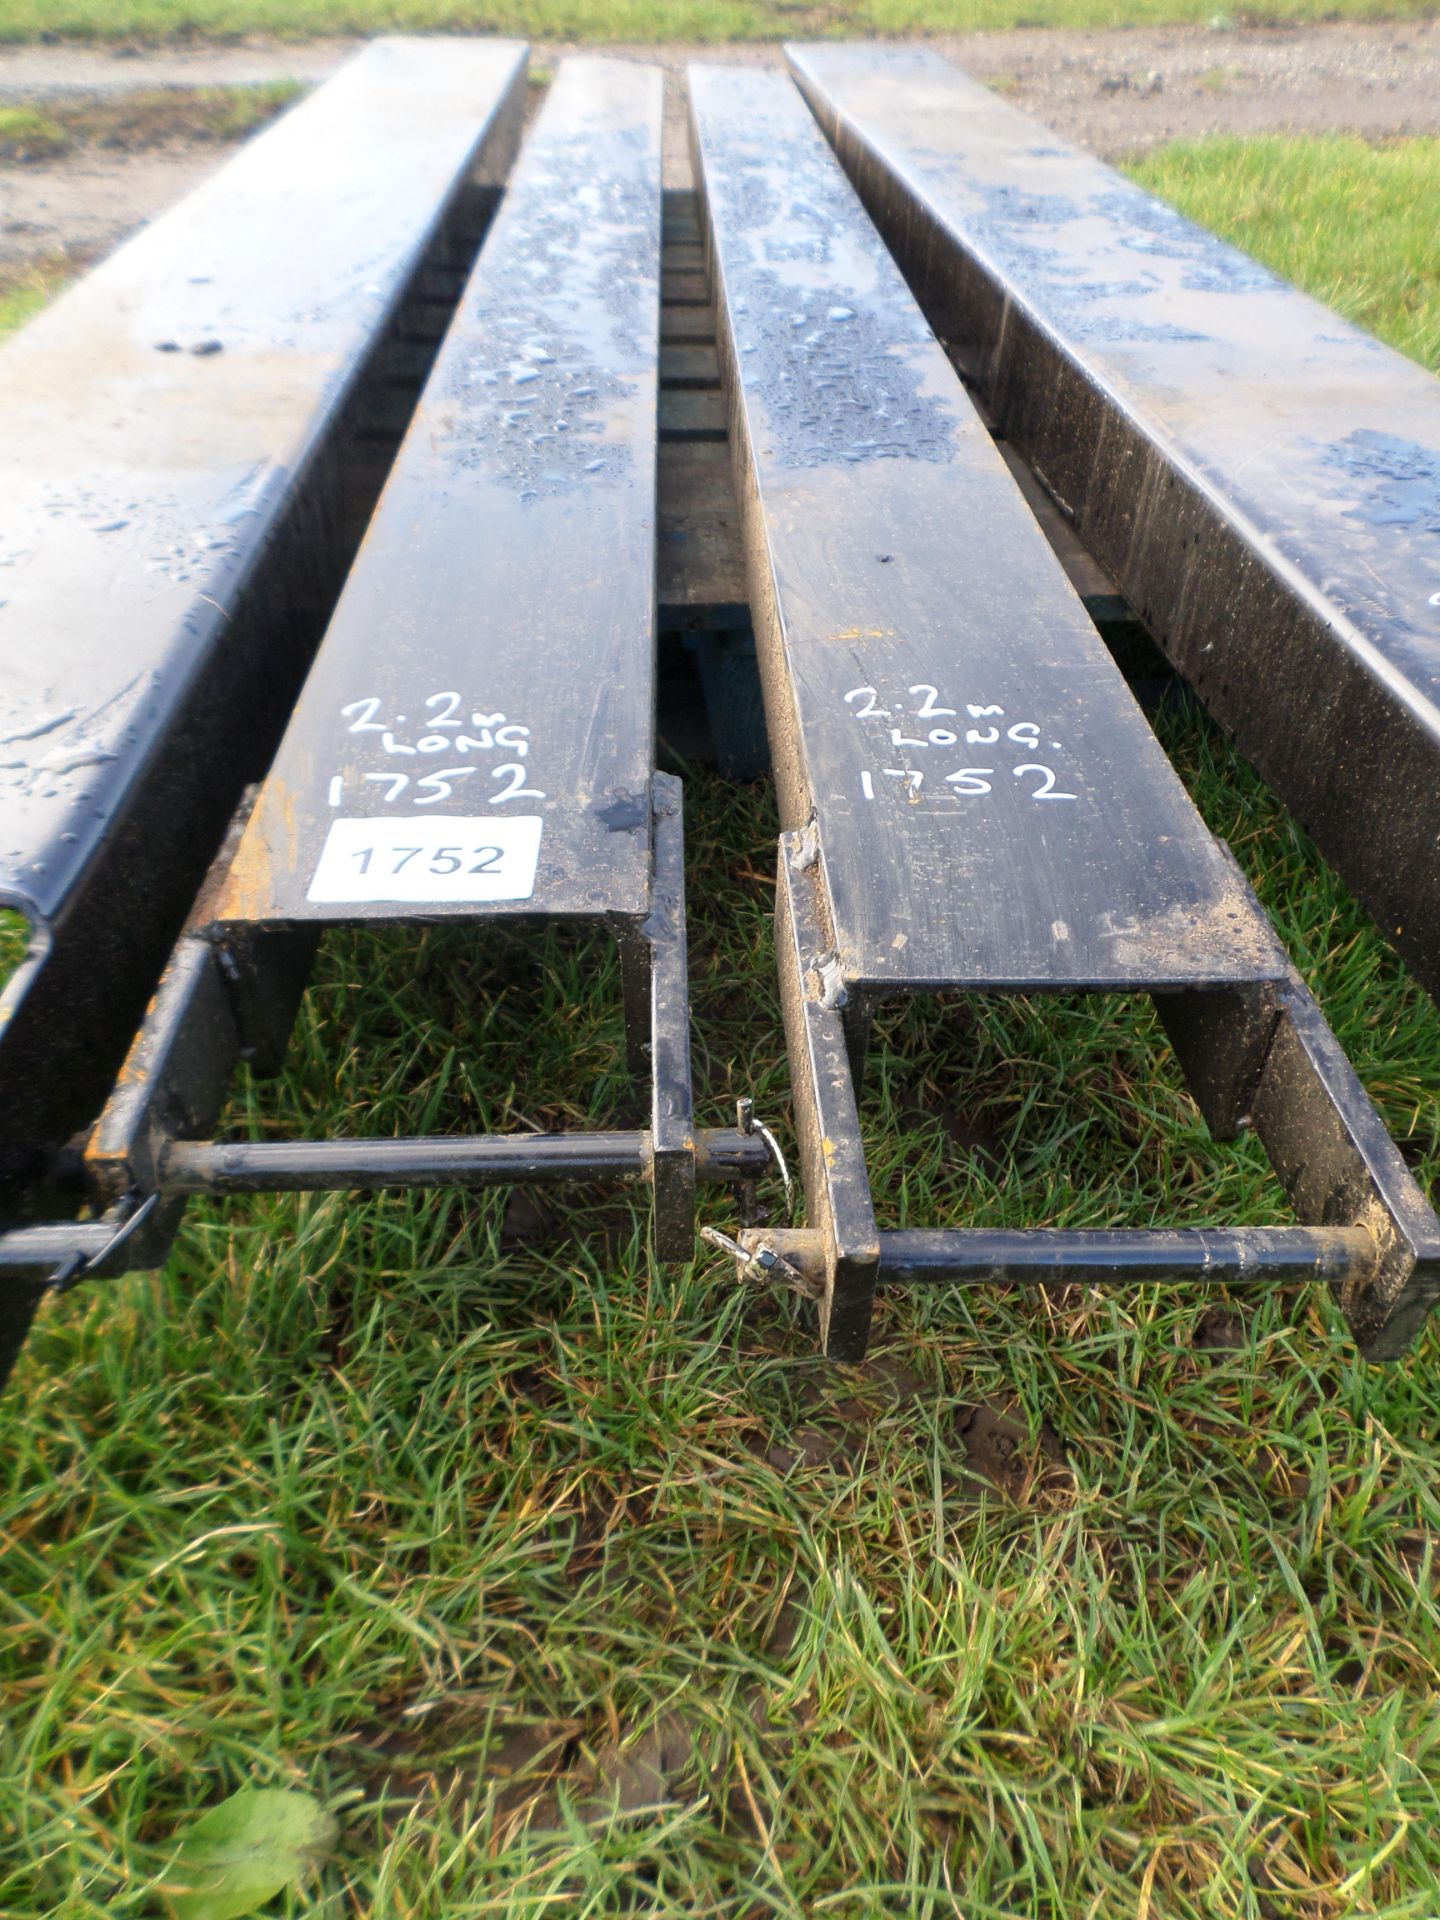 Pair of forklift extension tines 2.2m long